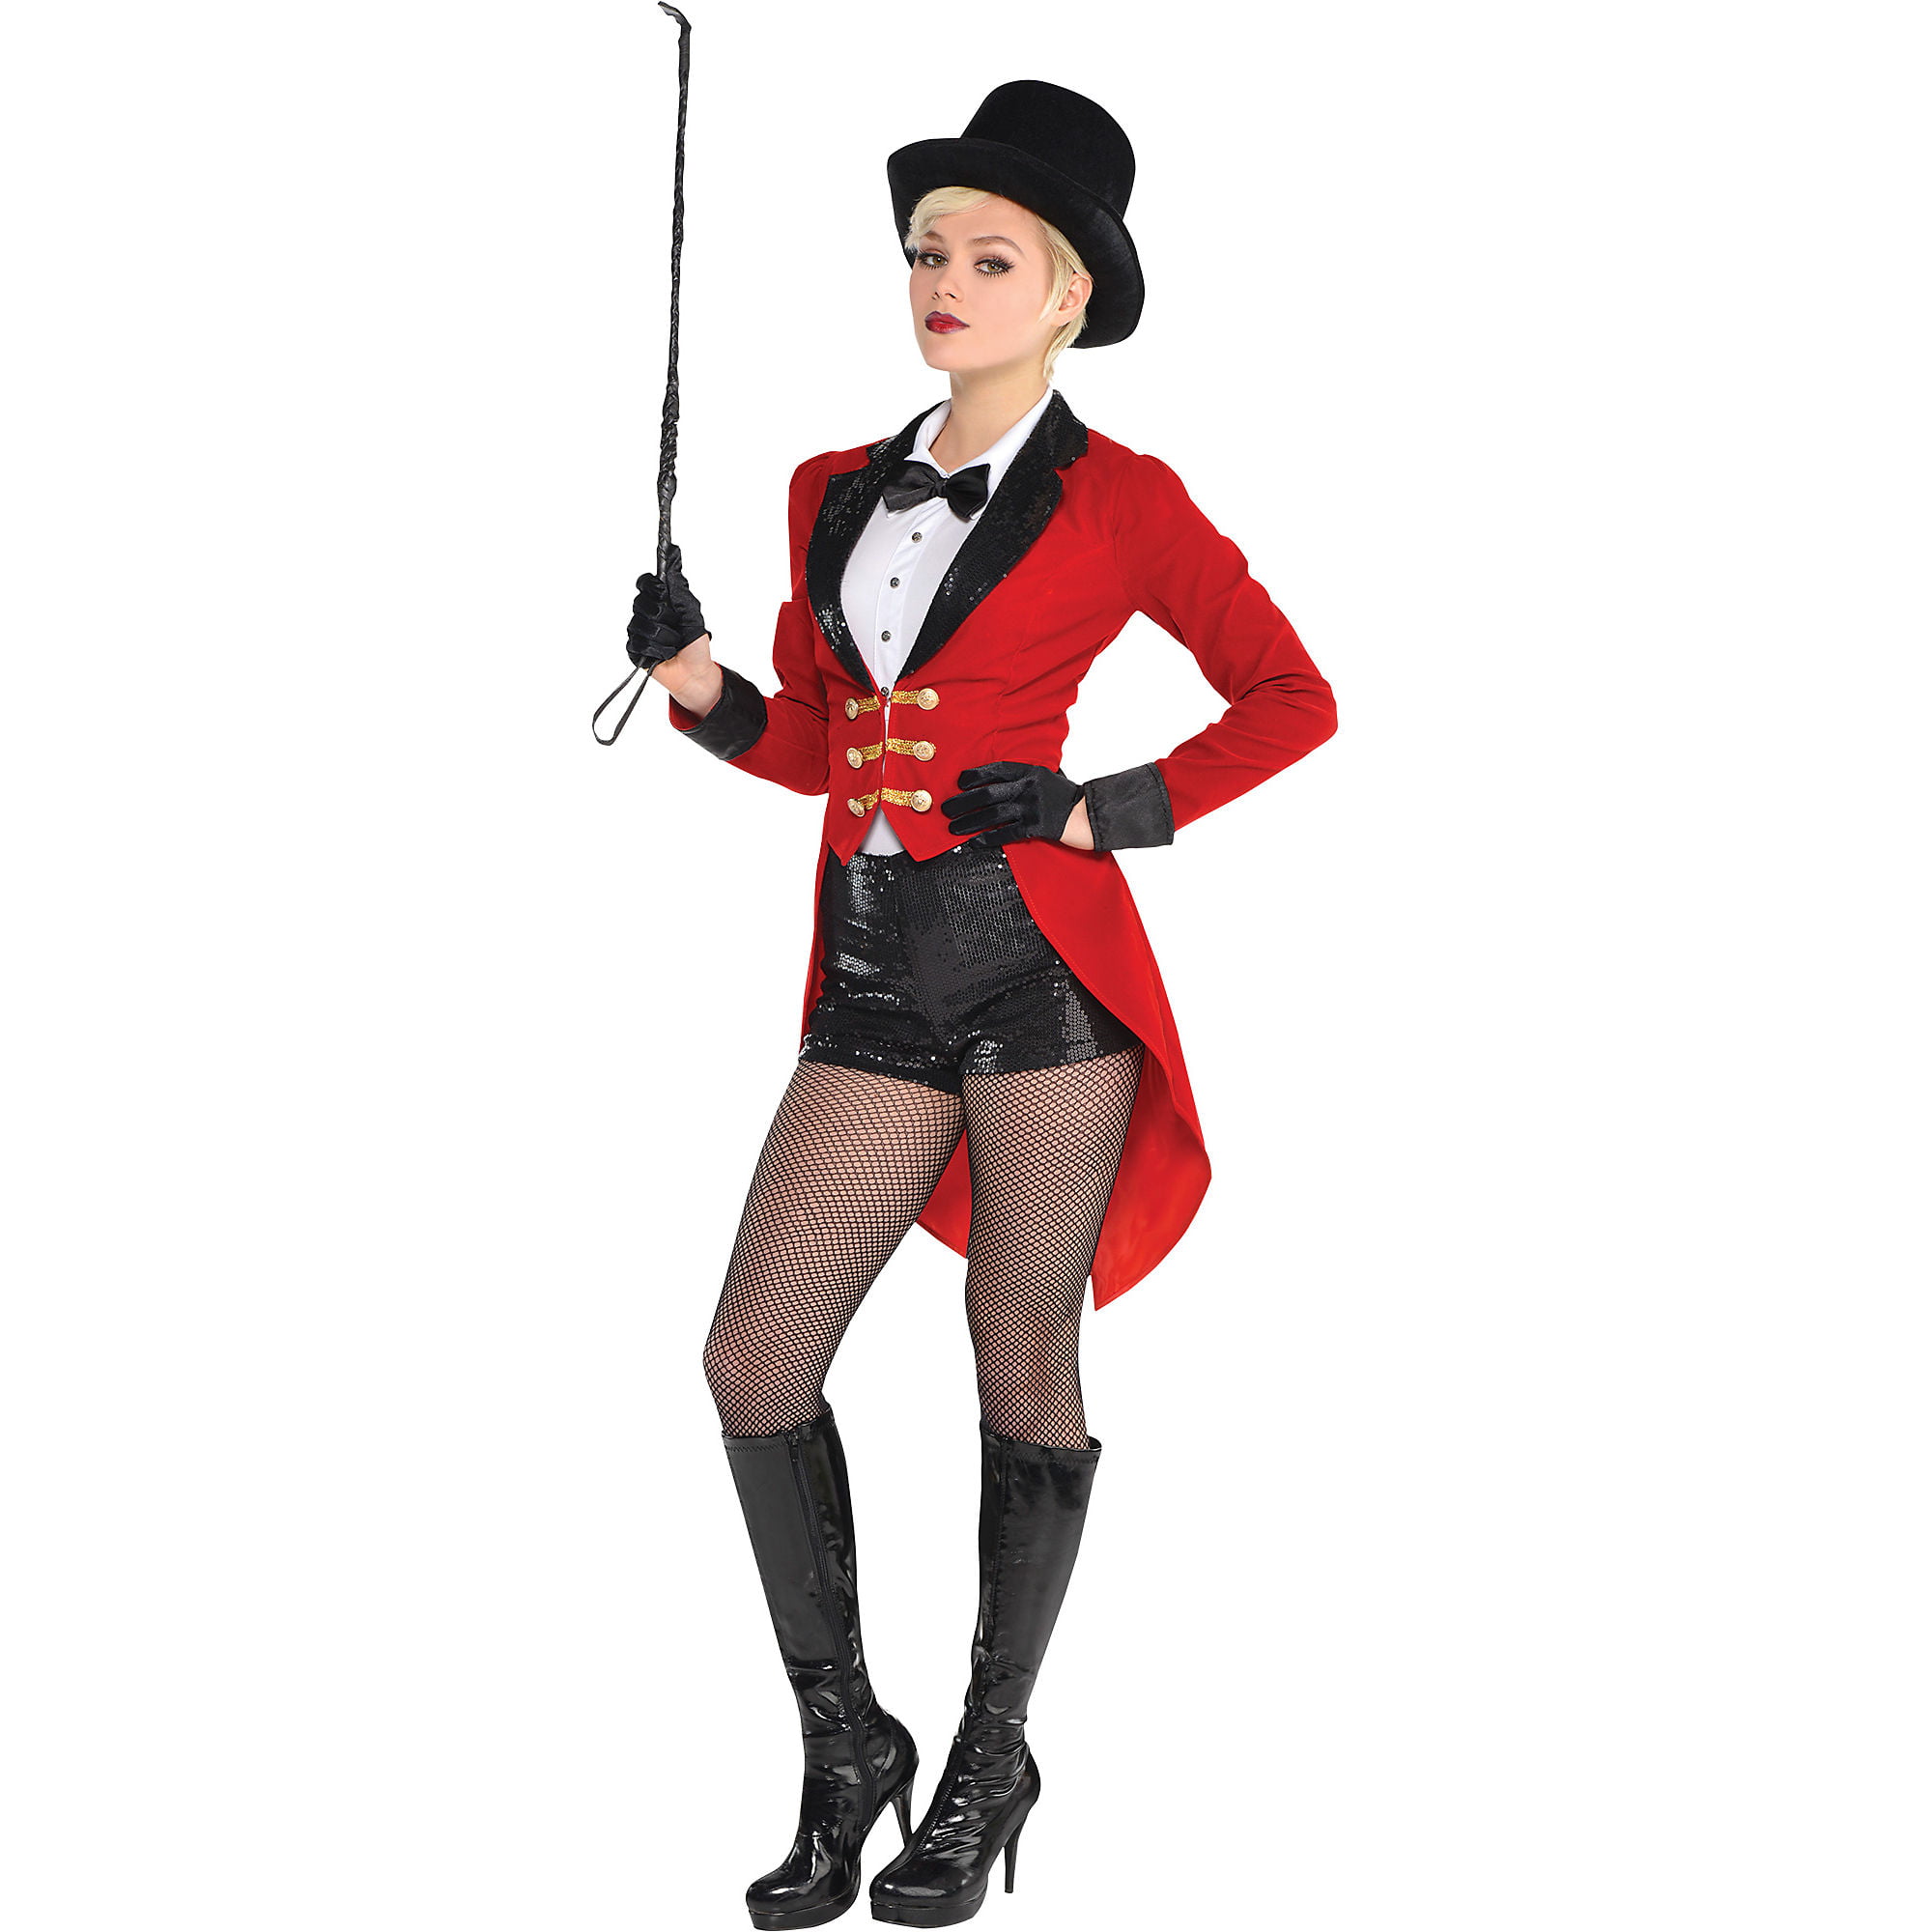 Hat Ladies Lion Tamer Fancy Dress S Details about   Womens Circus Ringmaster Costume XXL